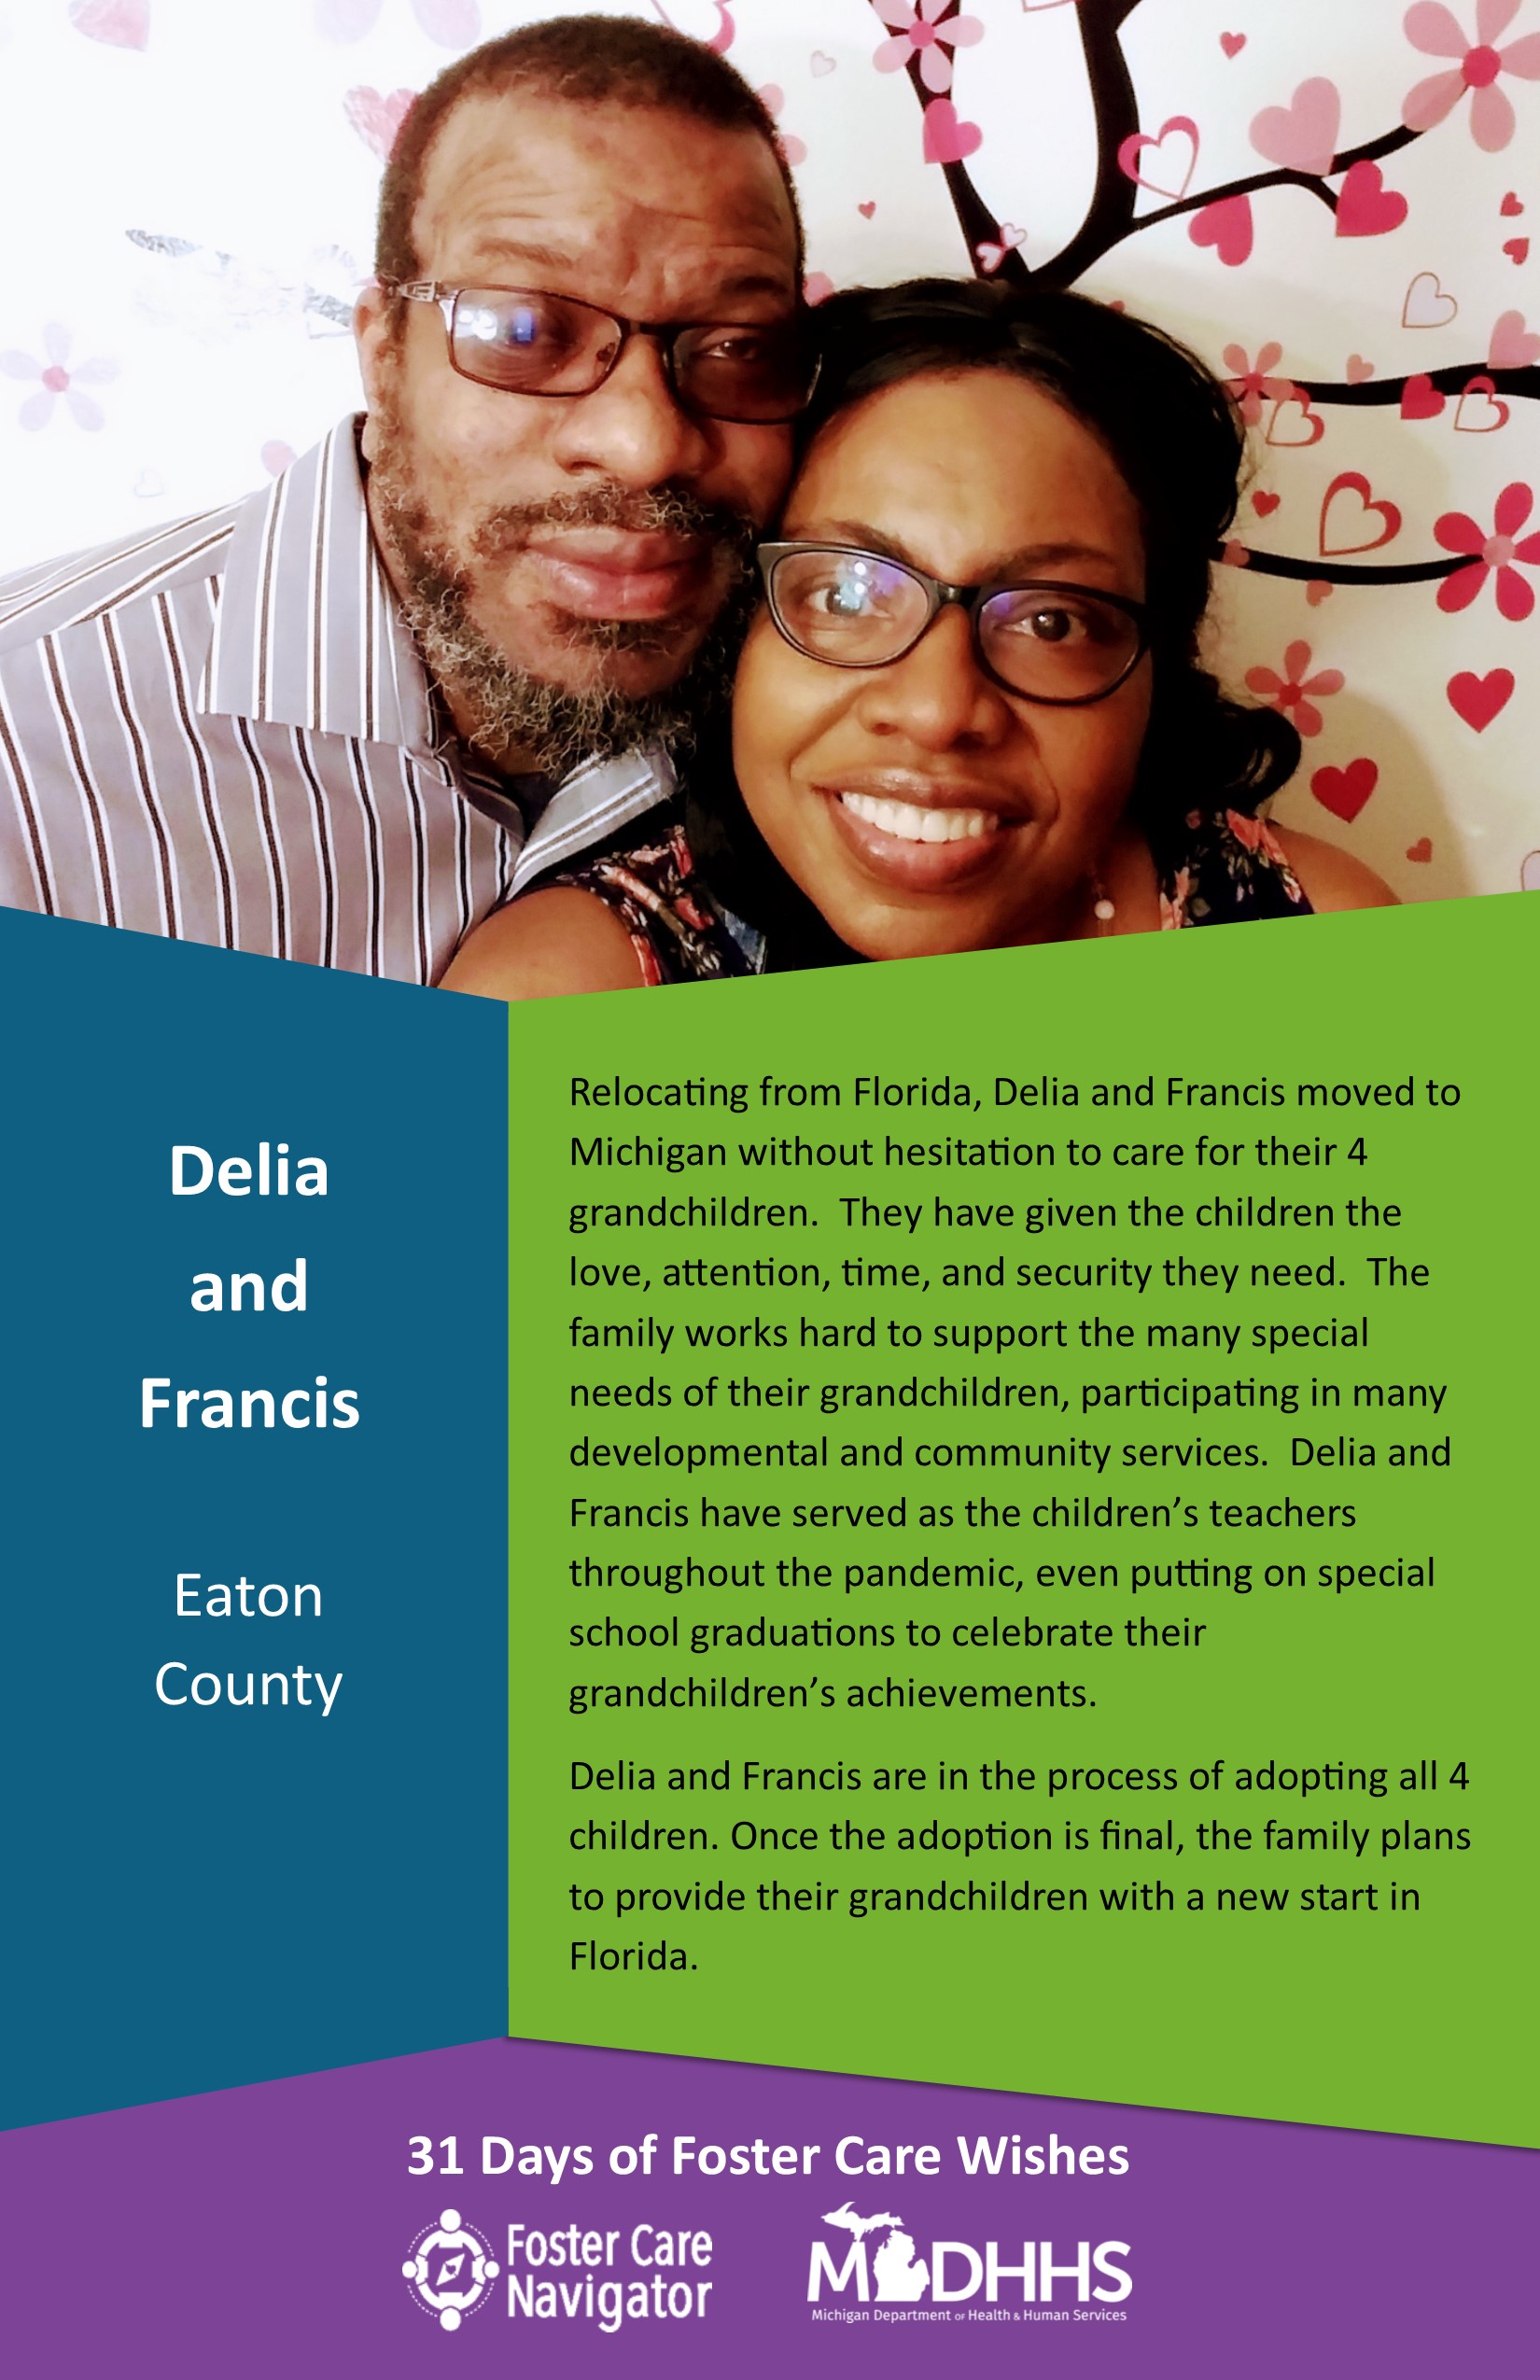 This full page feature includes all of the text listed in the body of this blog post as well as a photo of Delia and Francis. The background is blue on the left, green on the right, and purple at the bottom of the page where the logos are located.